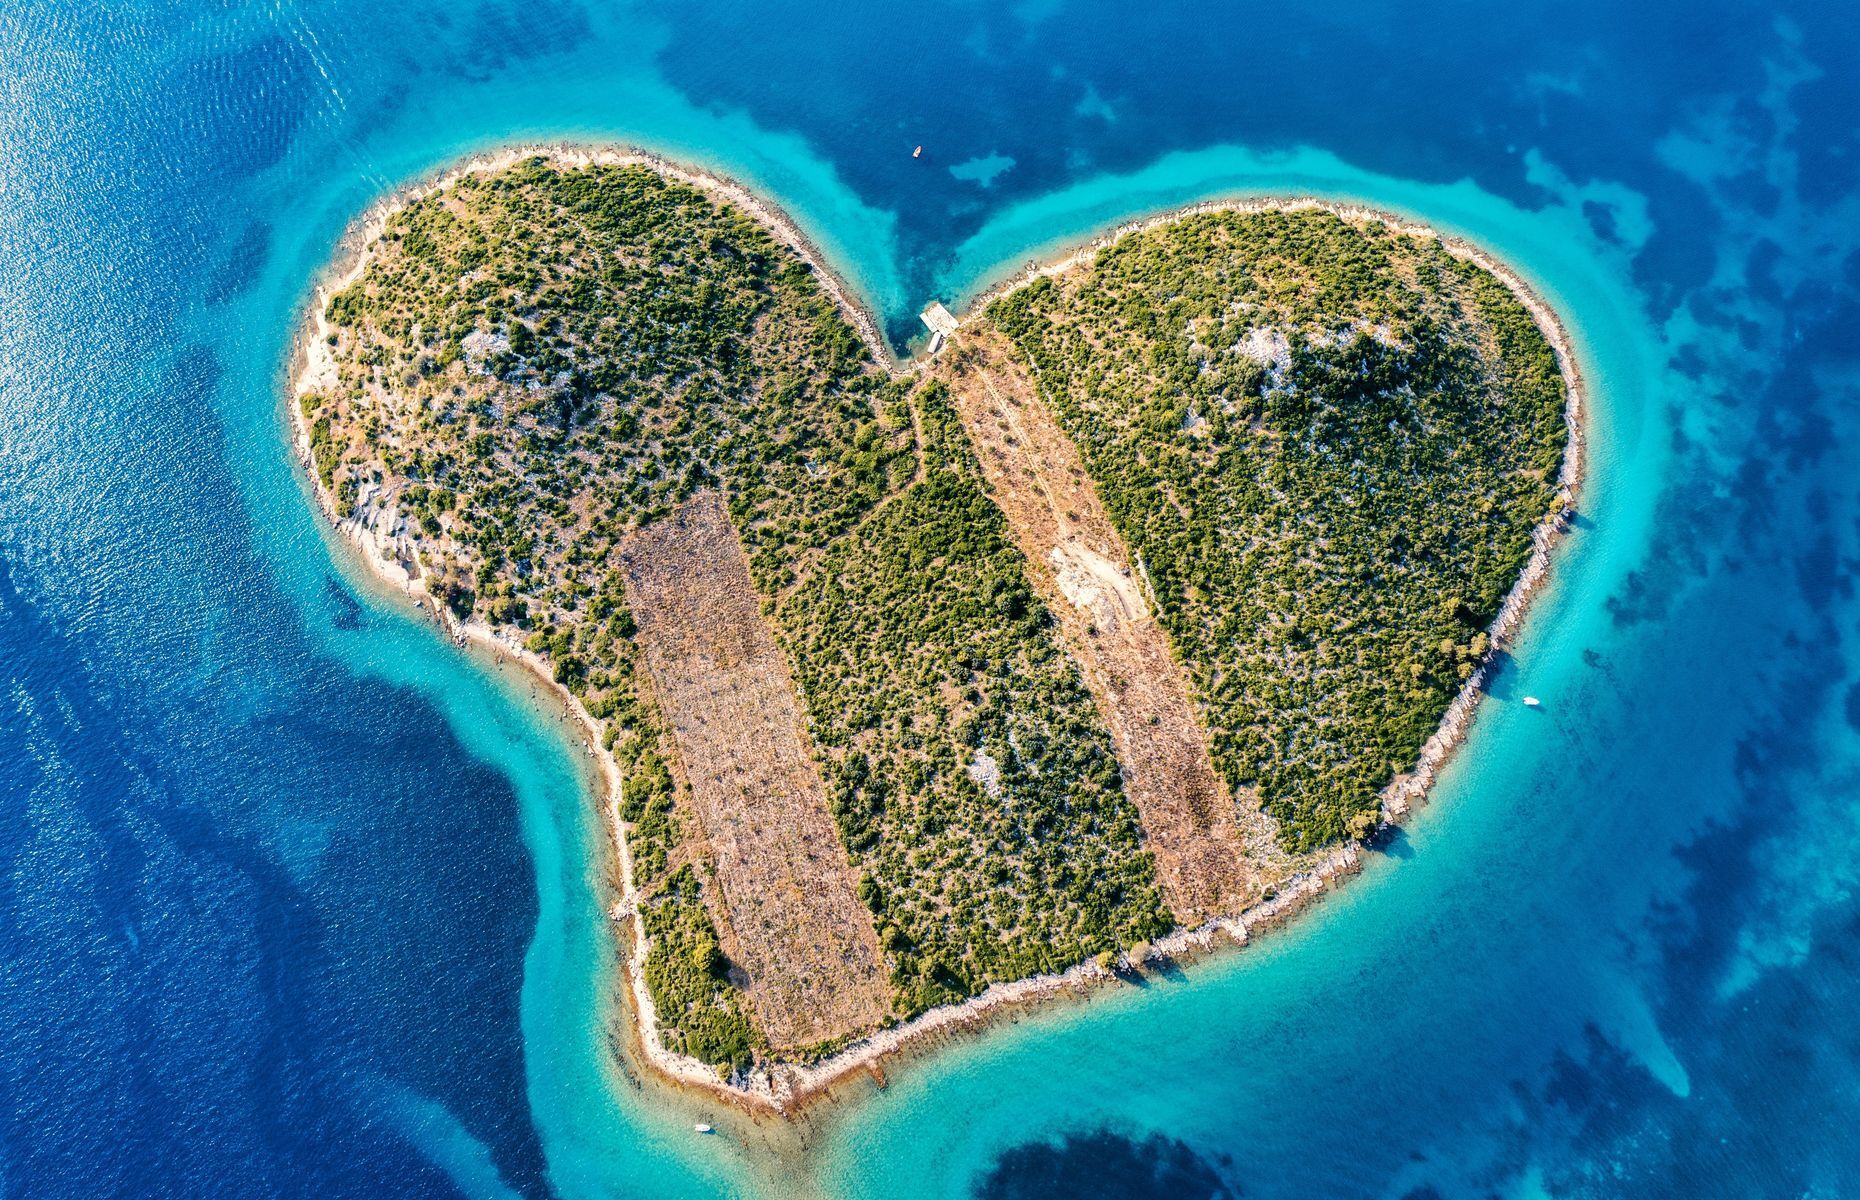 Famous for being shaped like a heart, the island of <a href="https://mybestplace.com/en/article/galesnjak-the-heart-shaped-croatian-island" rel="noreferrer noopener">Galešnjak</a> lies in the Adriatic Sea’s Pašman Channel not far from the village of Turanj. Also nicknamed “Love Island,” this enchanting spot is ideal for romantic strolls along secluded beaches kissed by turquoise waters. Numerous boat excursions are available to take you from Zadar to this uninhabited natural paradise.